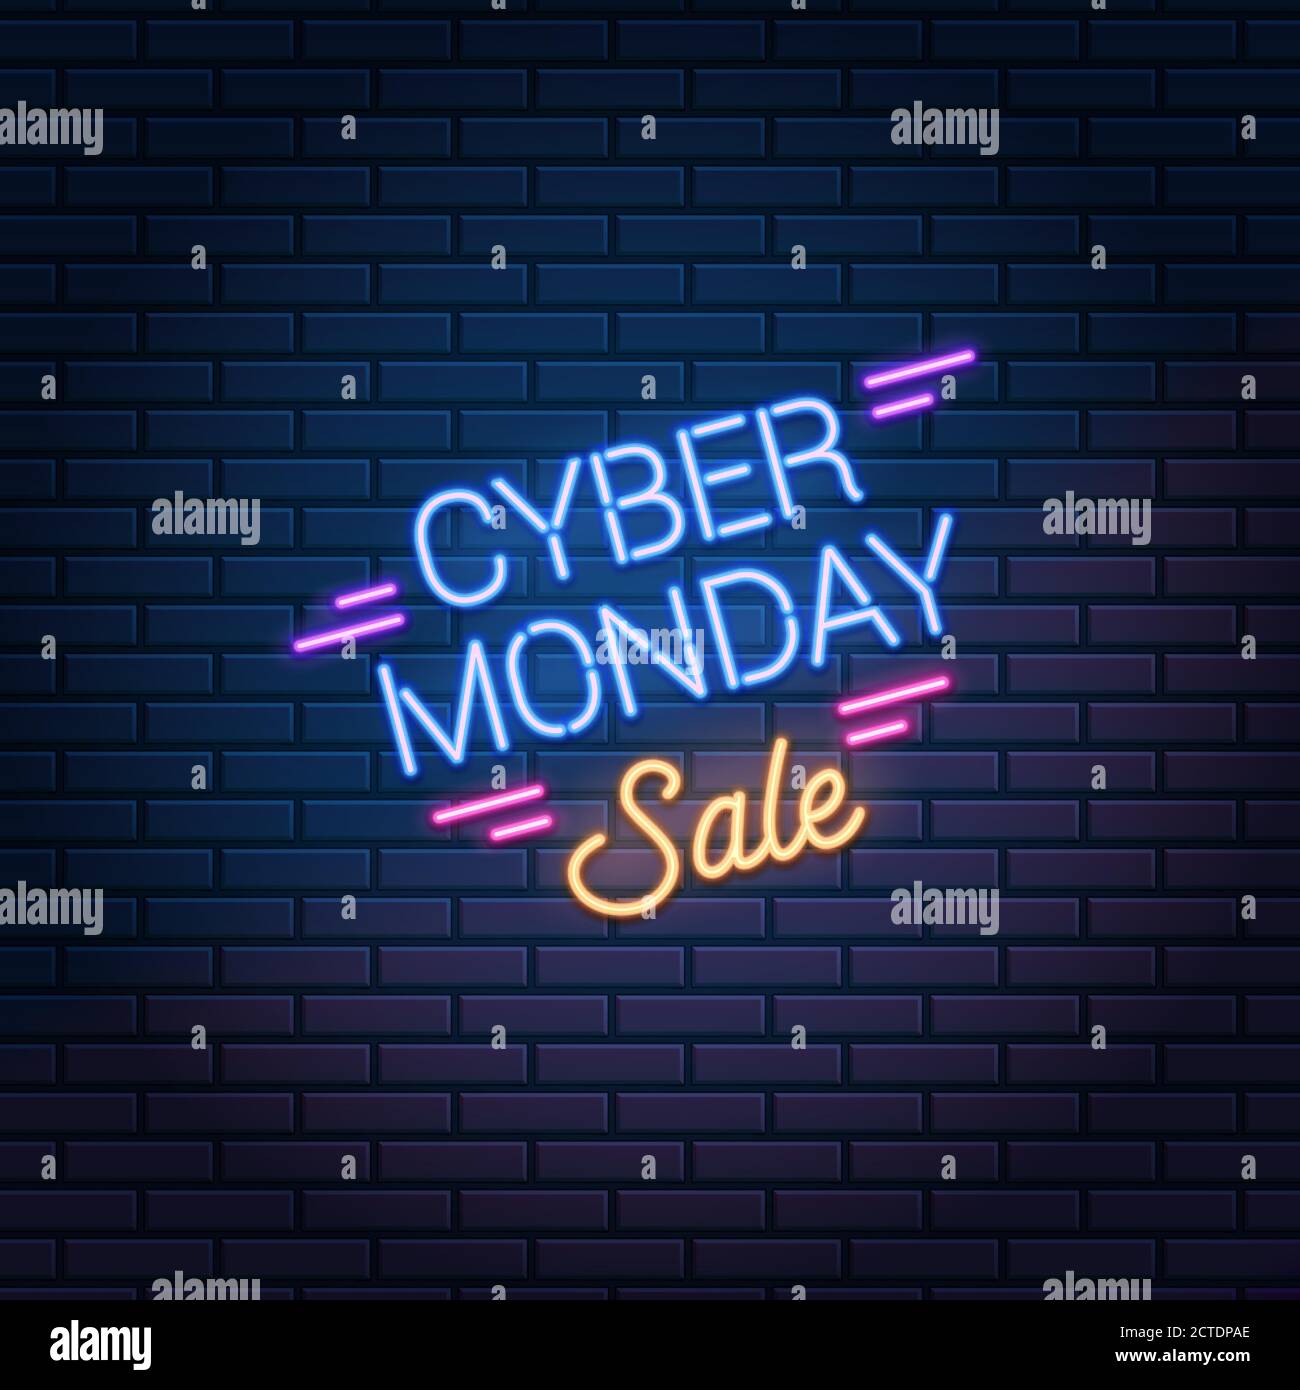 Cyber Monday Sale neon sign on dark brick wall background. Super discounts shopping promo, vector illustration Stock Vector